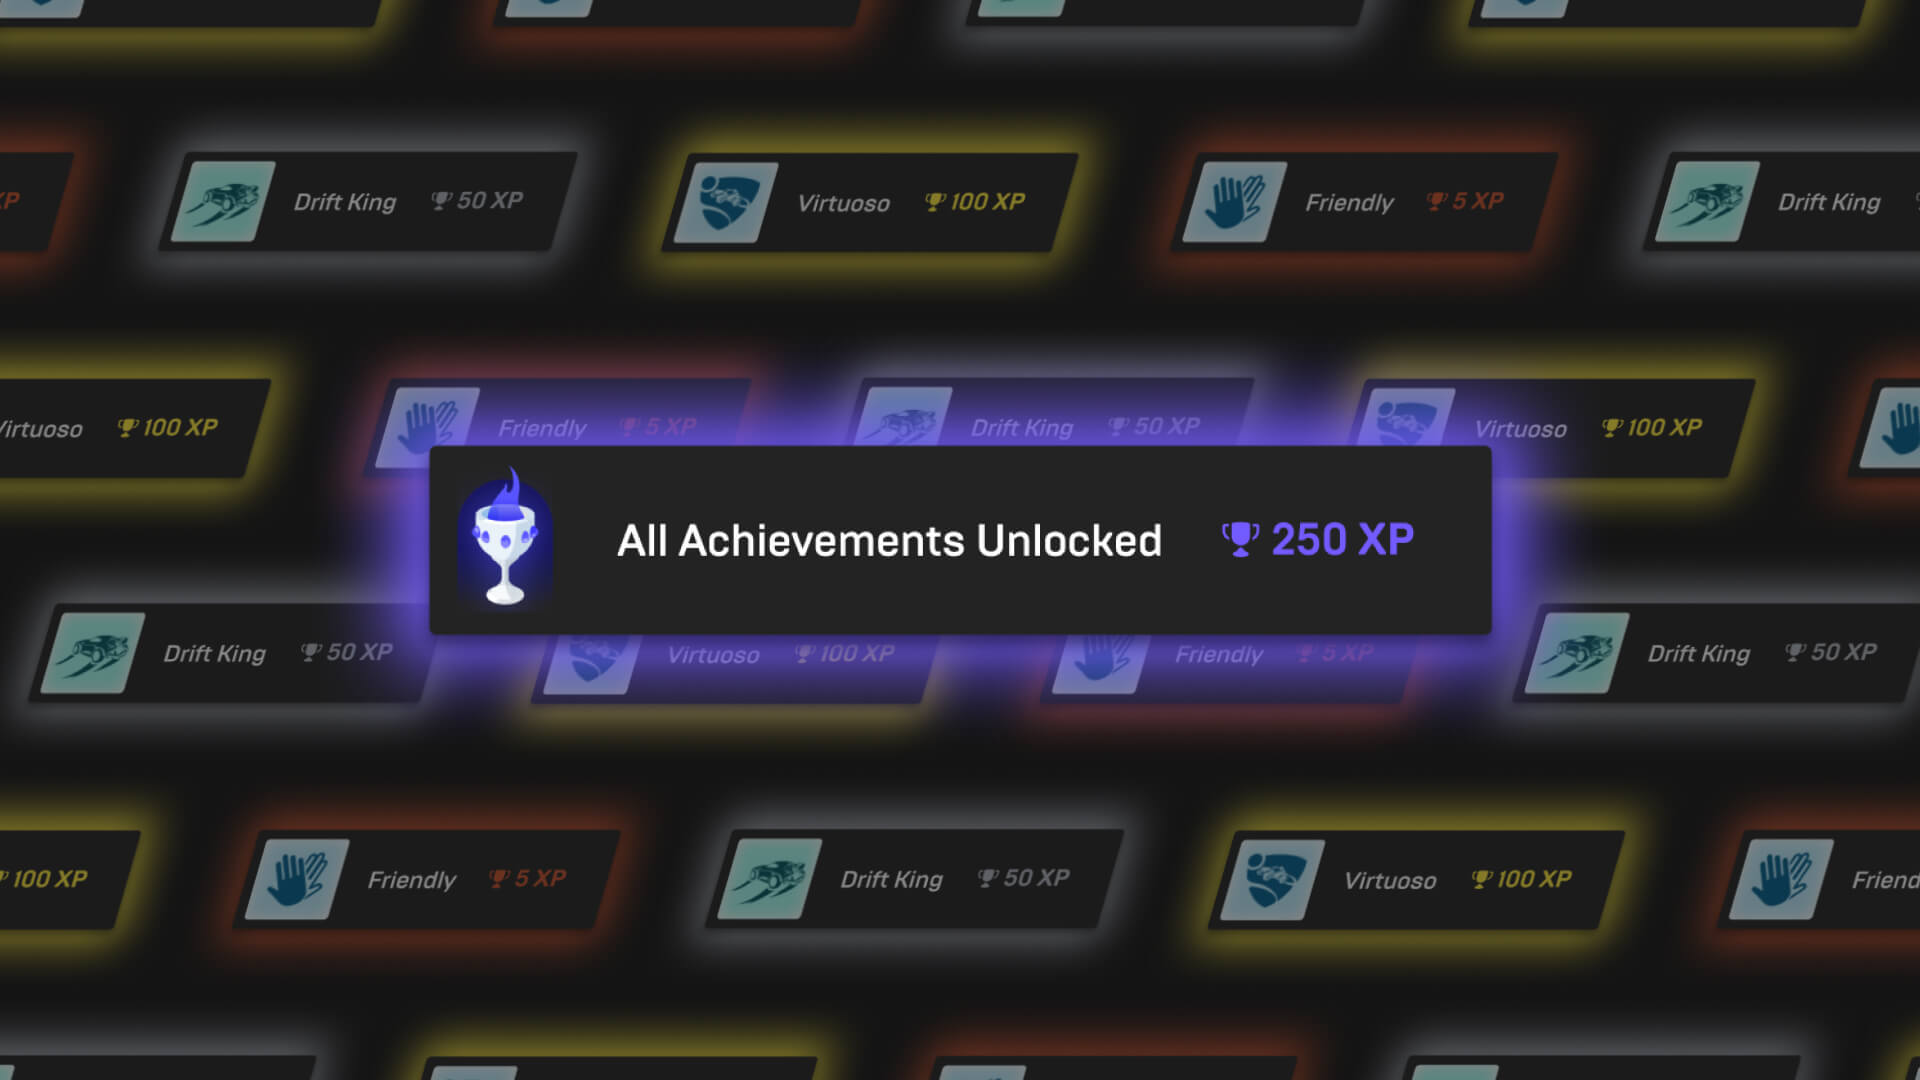 Epic Games Store achievements header image  showing different game achievements and XP values. "All Achievements Unlocked" in the center is worth 250 XP.